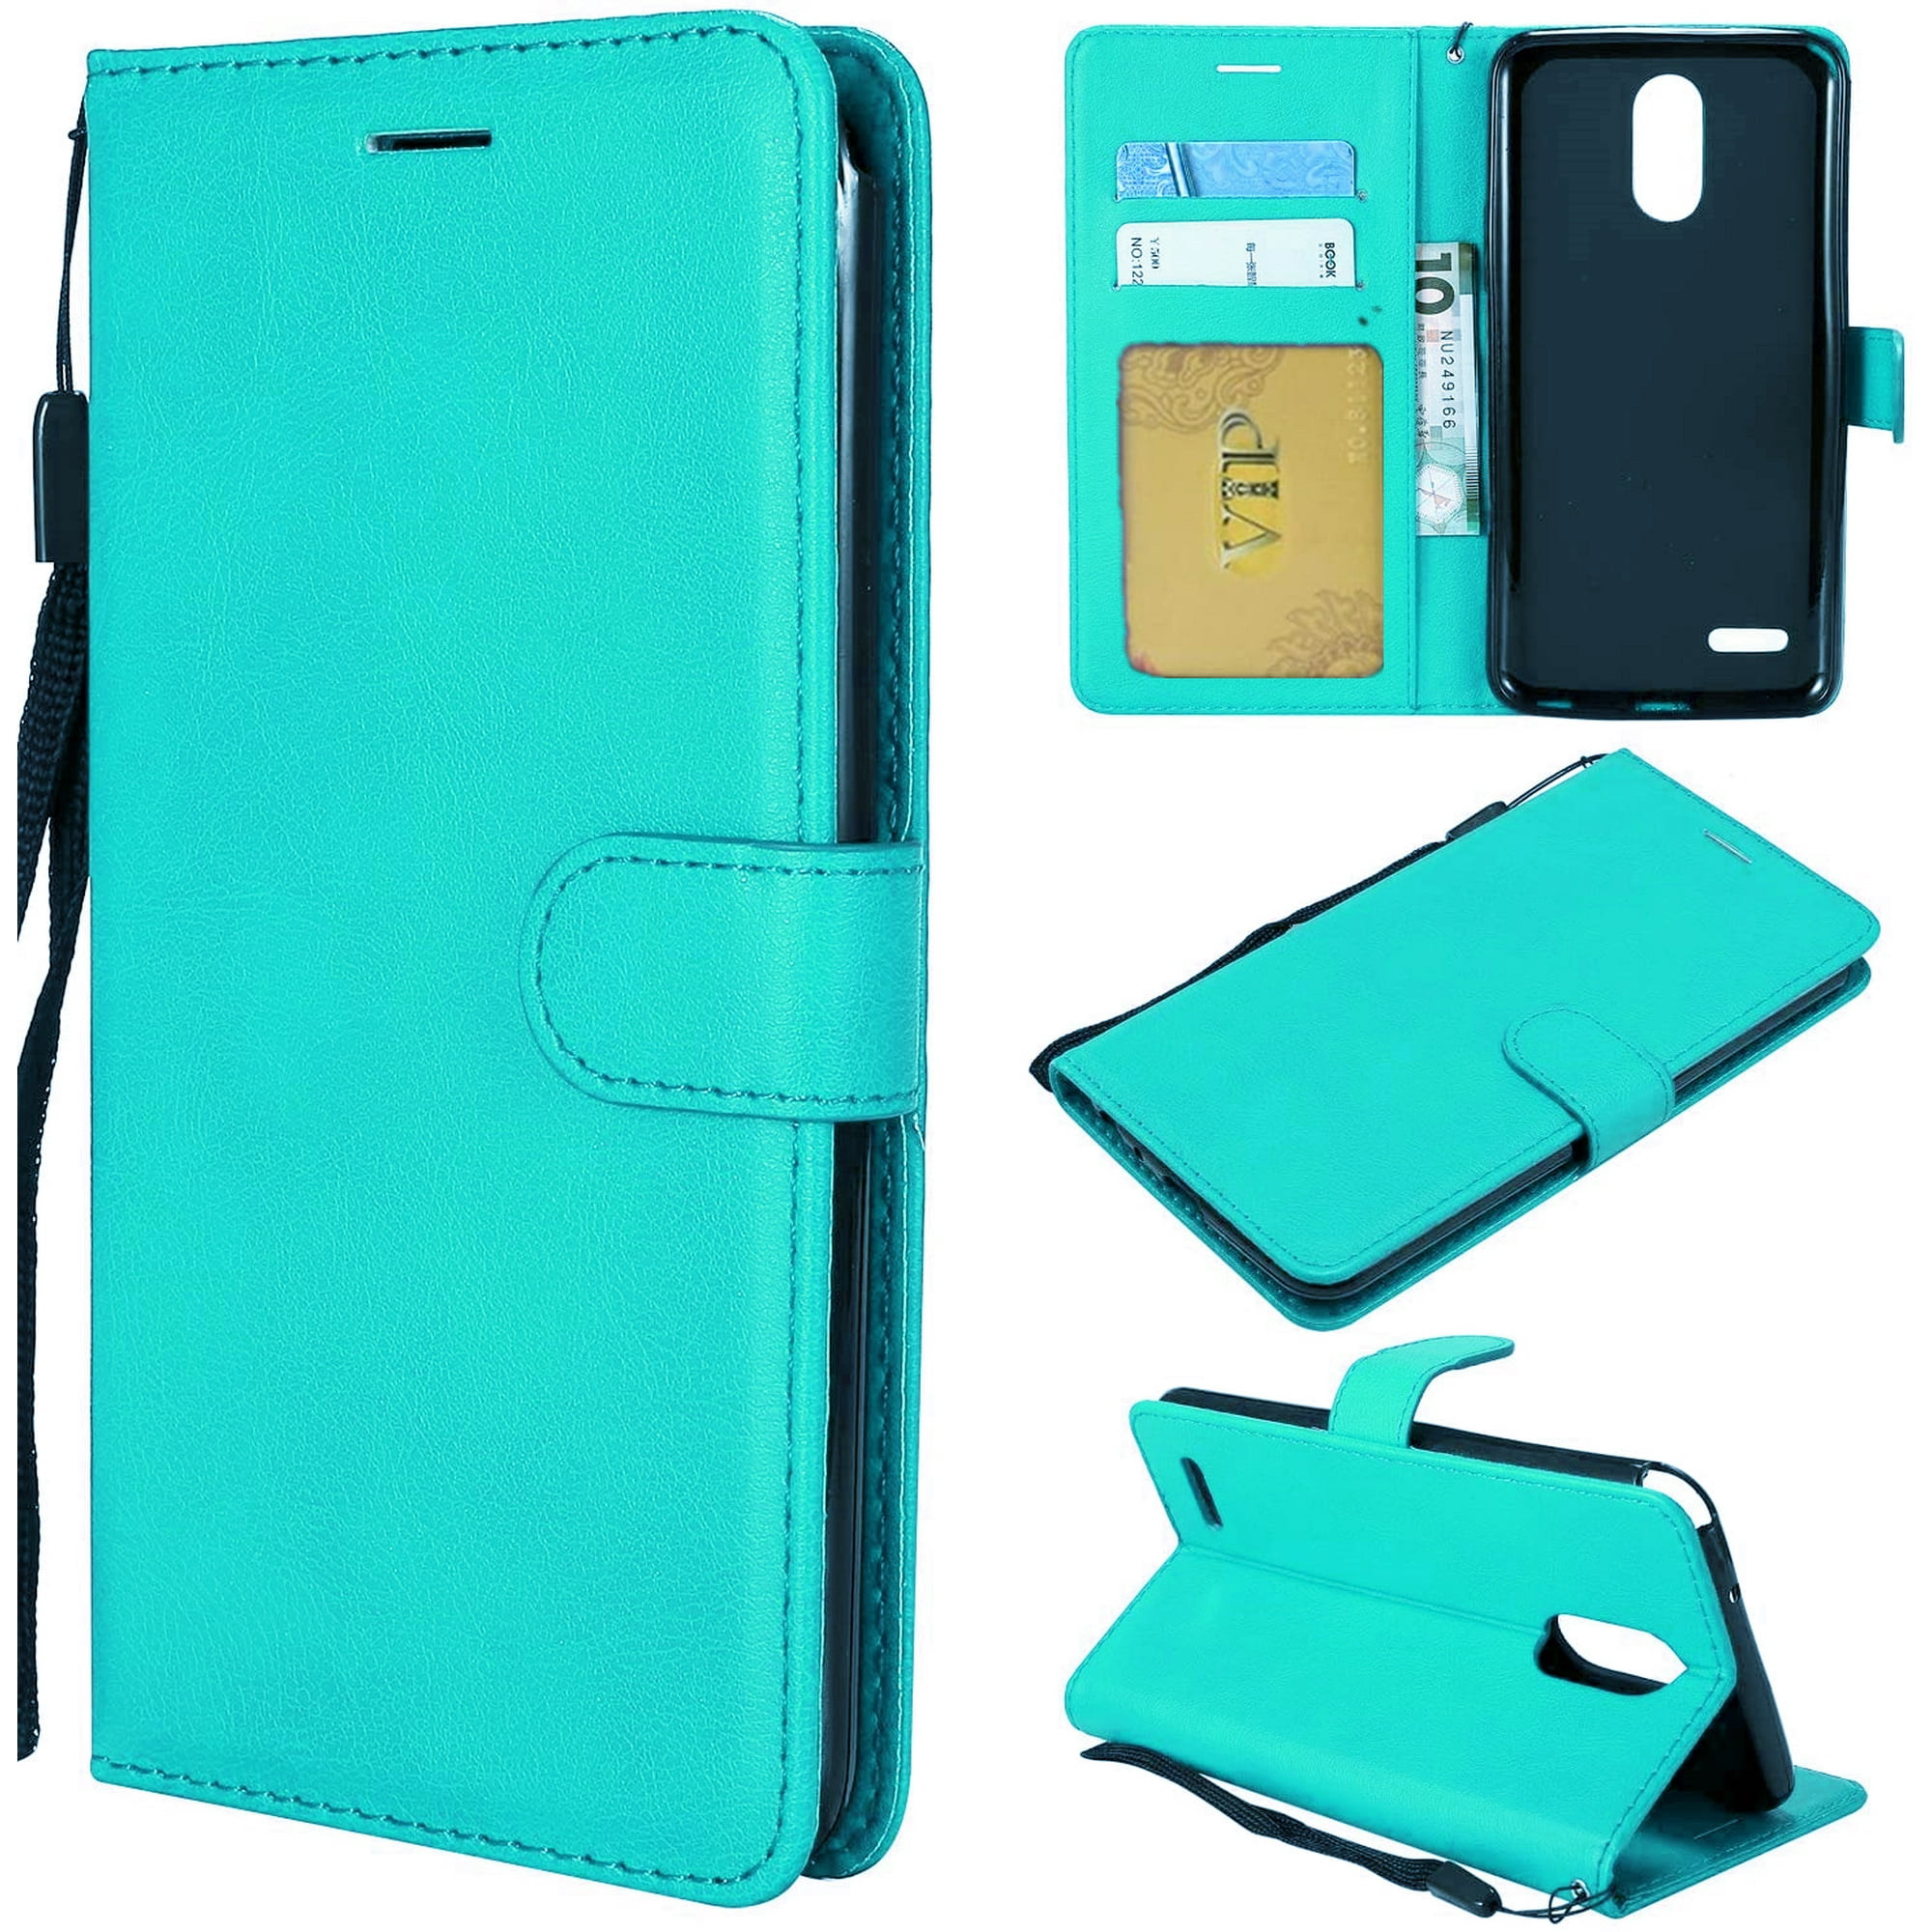 [PST] LG STYLO 3 / STYLO 3 Plus Case, Leather Magnetic Card 